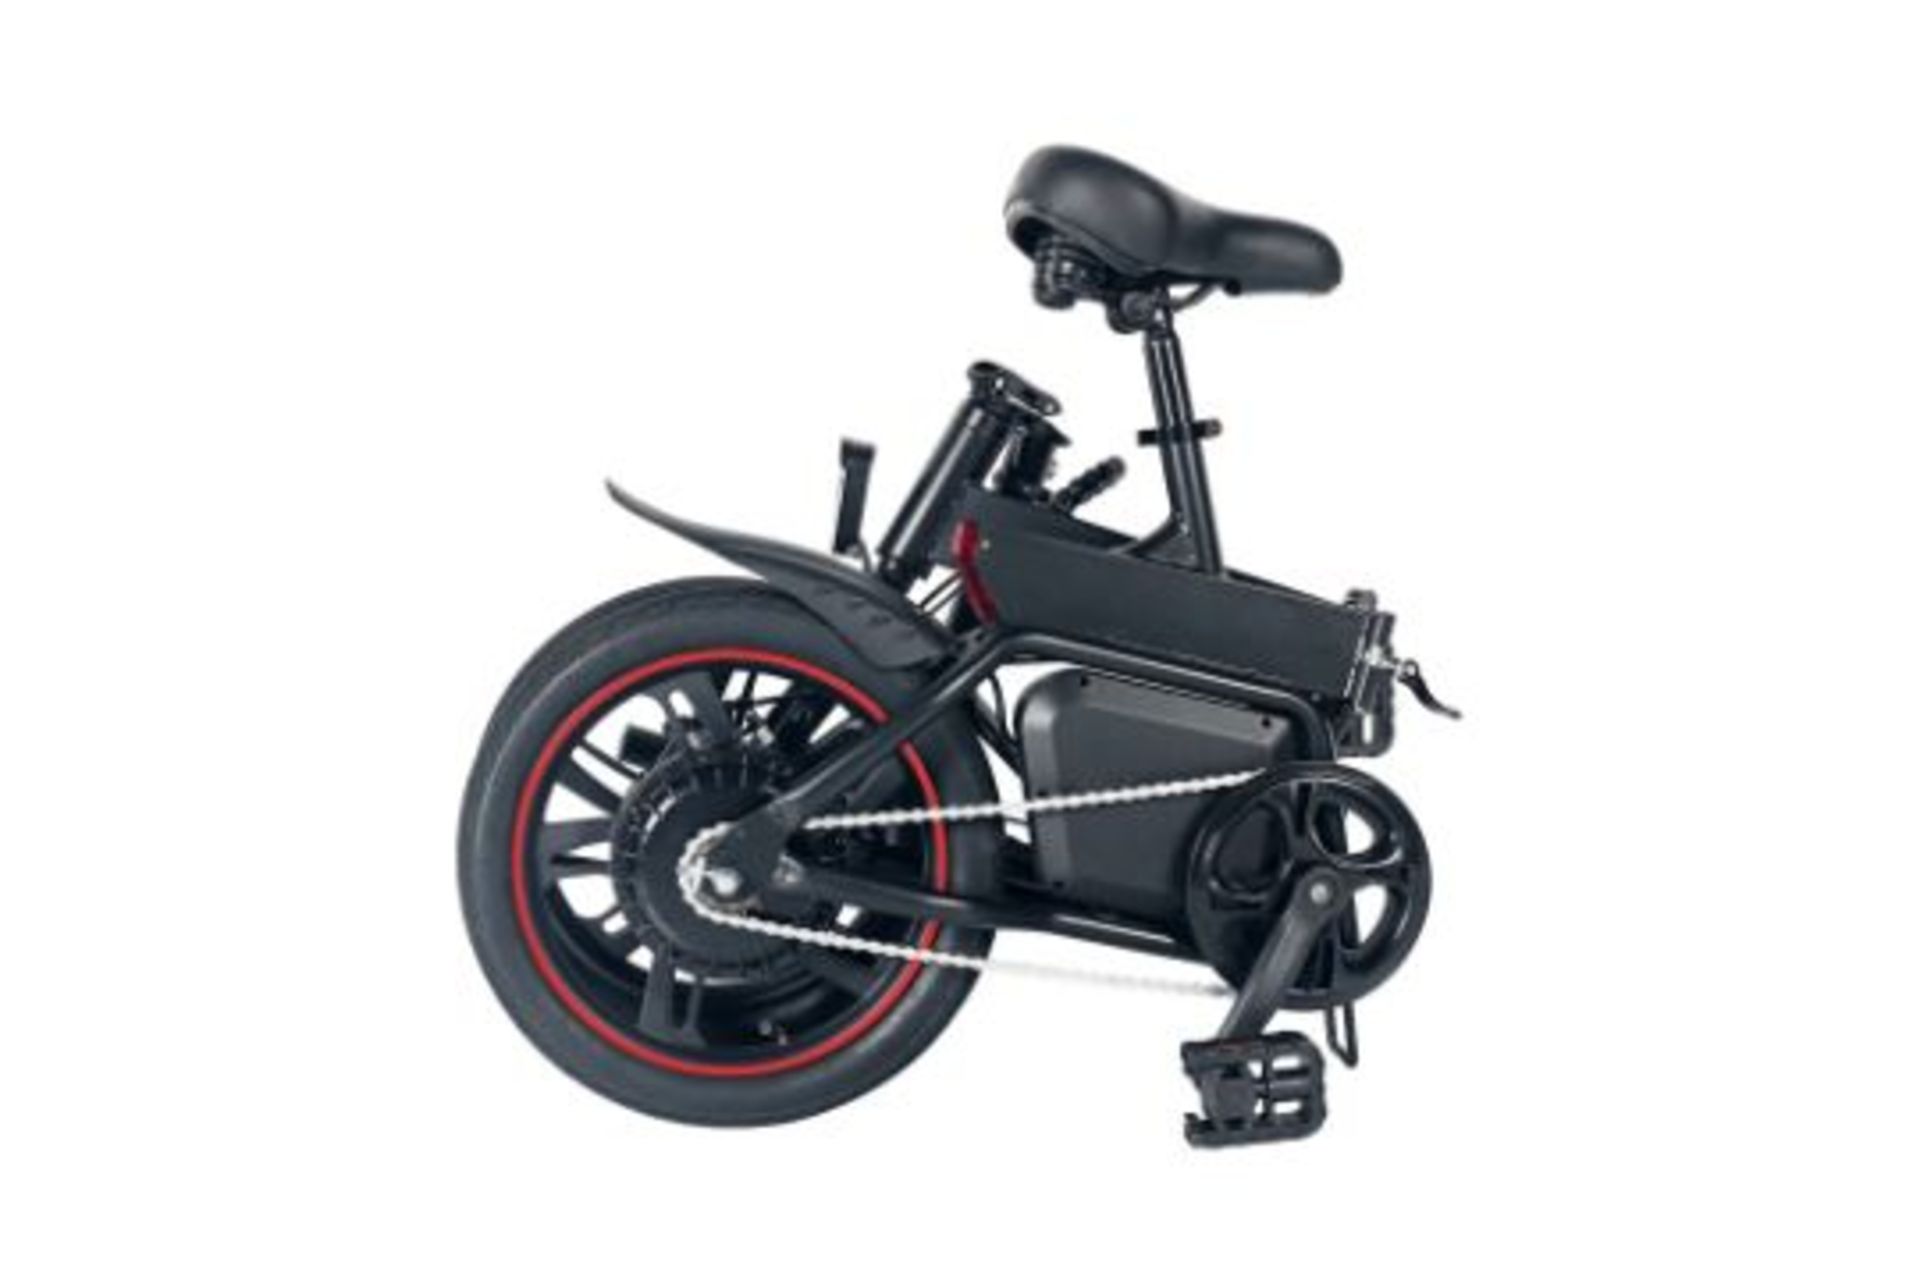 5 X BRAND NEW Windgoo B20 Pro Electric Bike. RRP £1,100.99. With 16-inch-wide tires and a frame of - Image 2 of 2